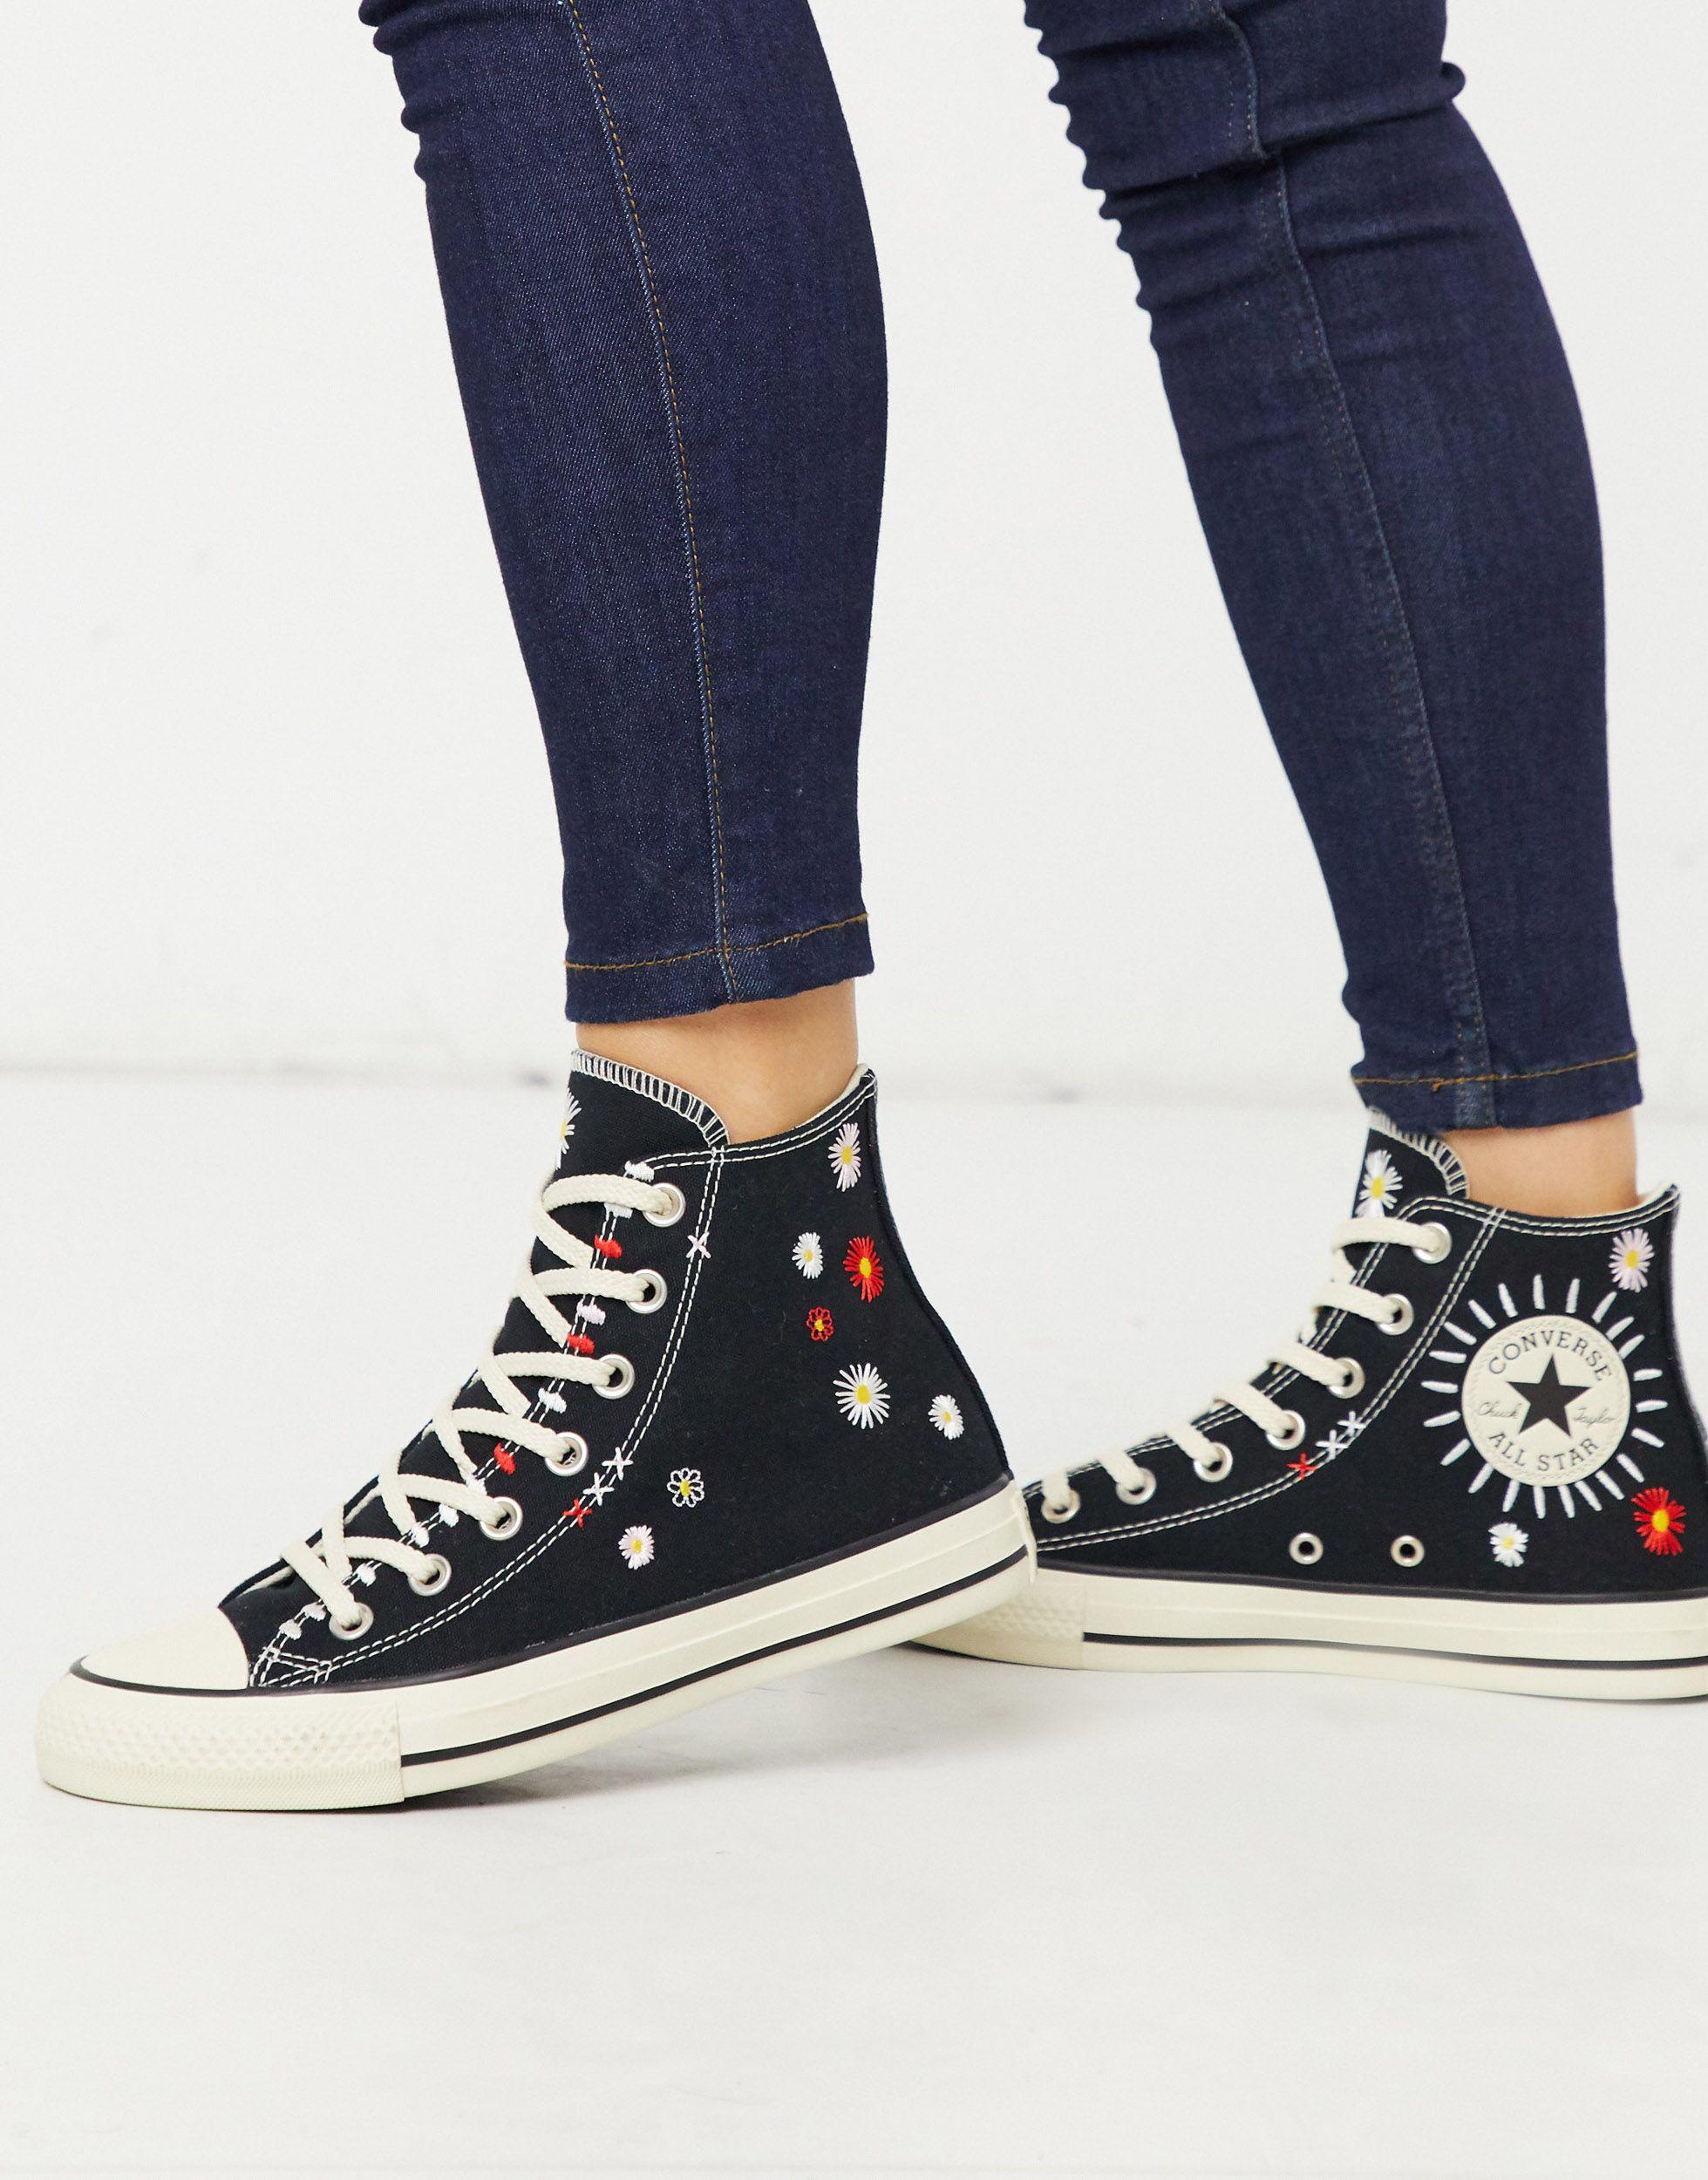 Converse Chuck Taylor All Star Hi Black Embroidered Floral Sneakers | Lyst  Canada